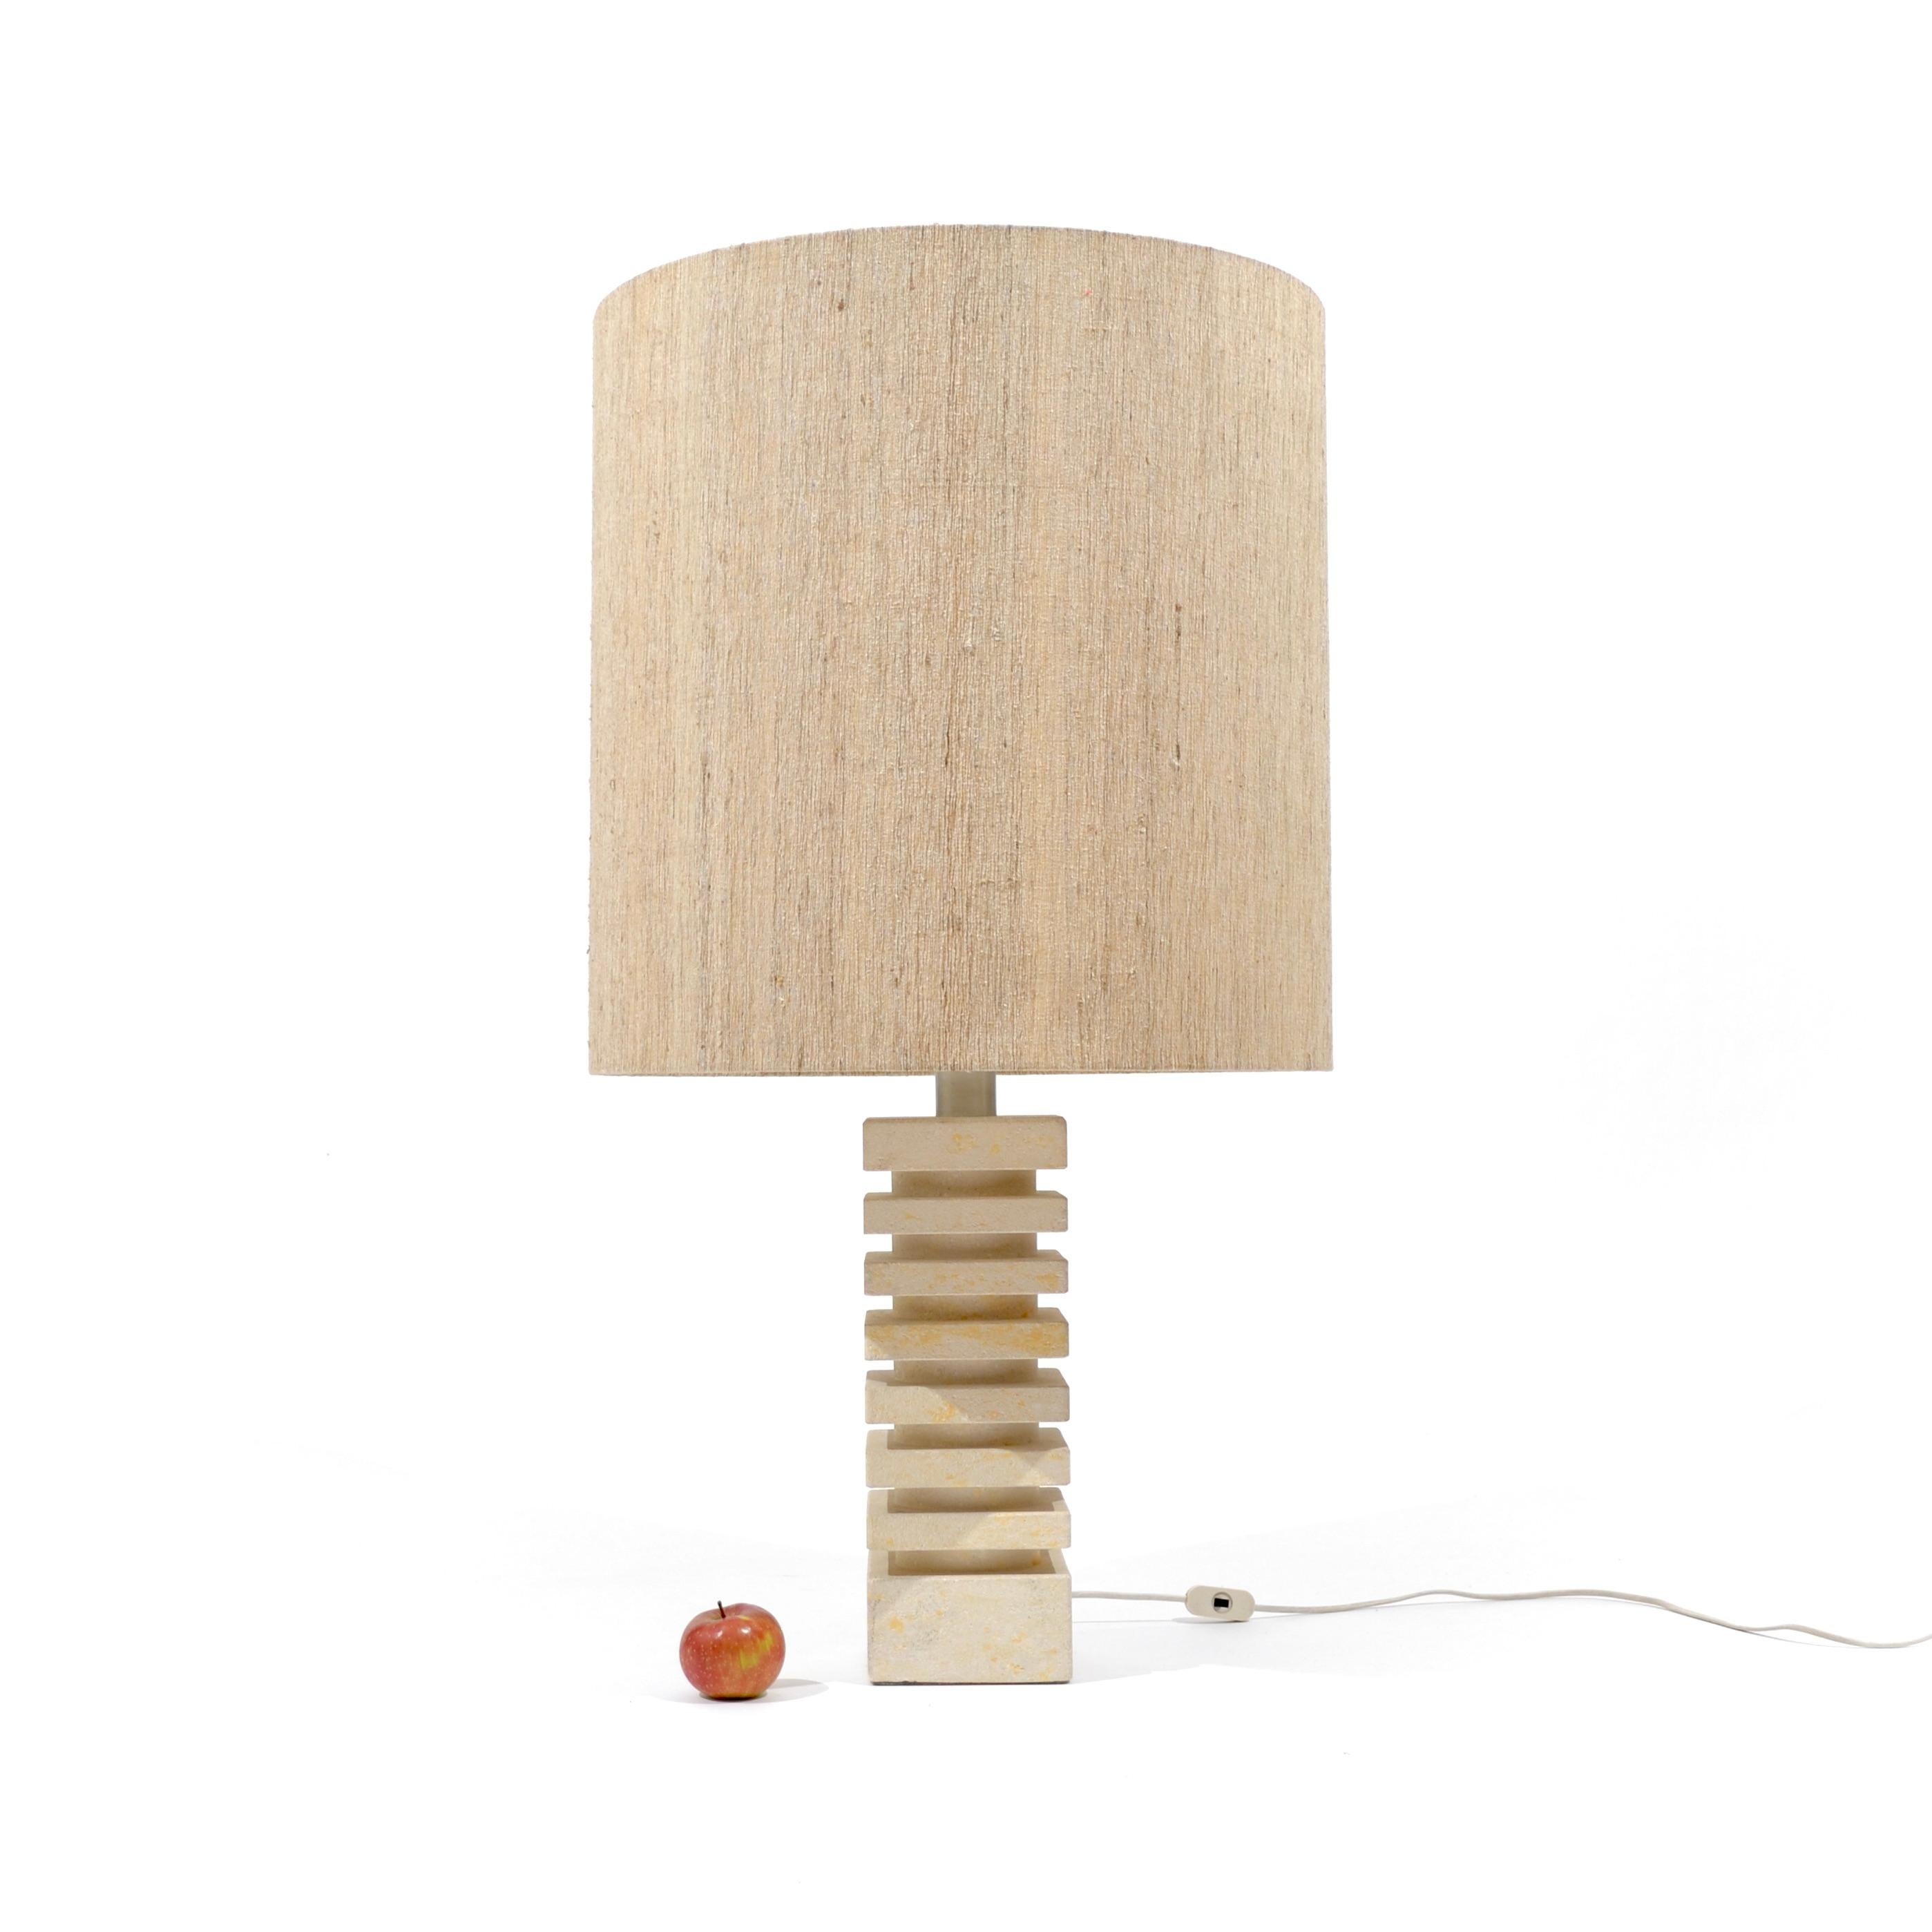 Carved from Lubéron stone, this lamp evokes the creations made towards the end of the 60s and early 70s in Provence. Little tribute to Albert Tormos and his anthropomorphic lamps sculpted near Ramatuelle.

The natural and mineral tones highlighted